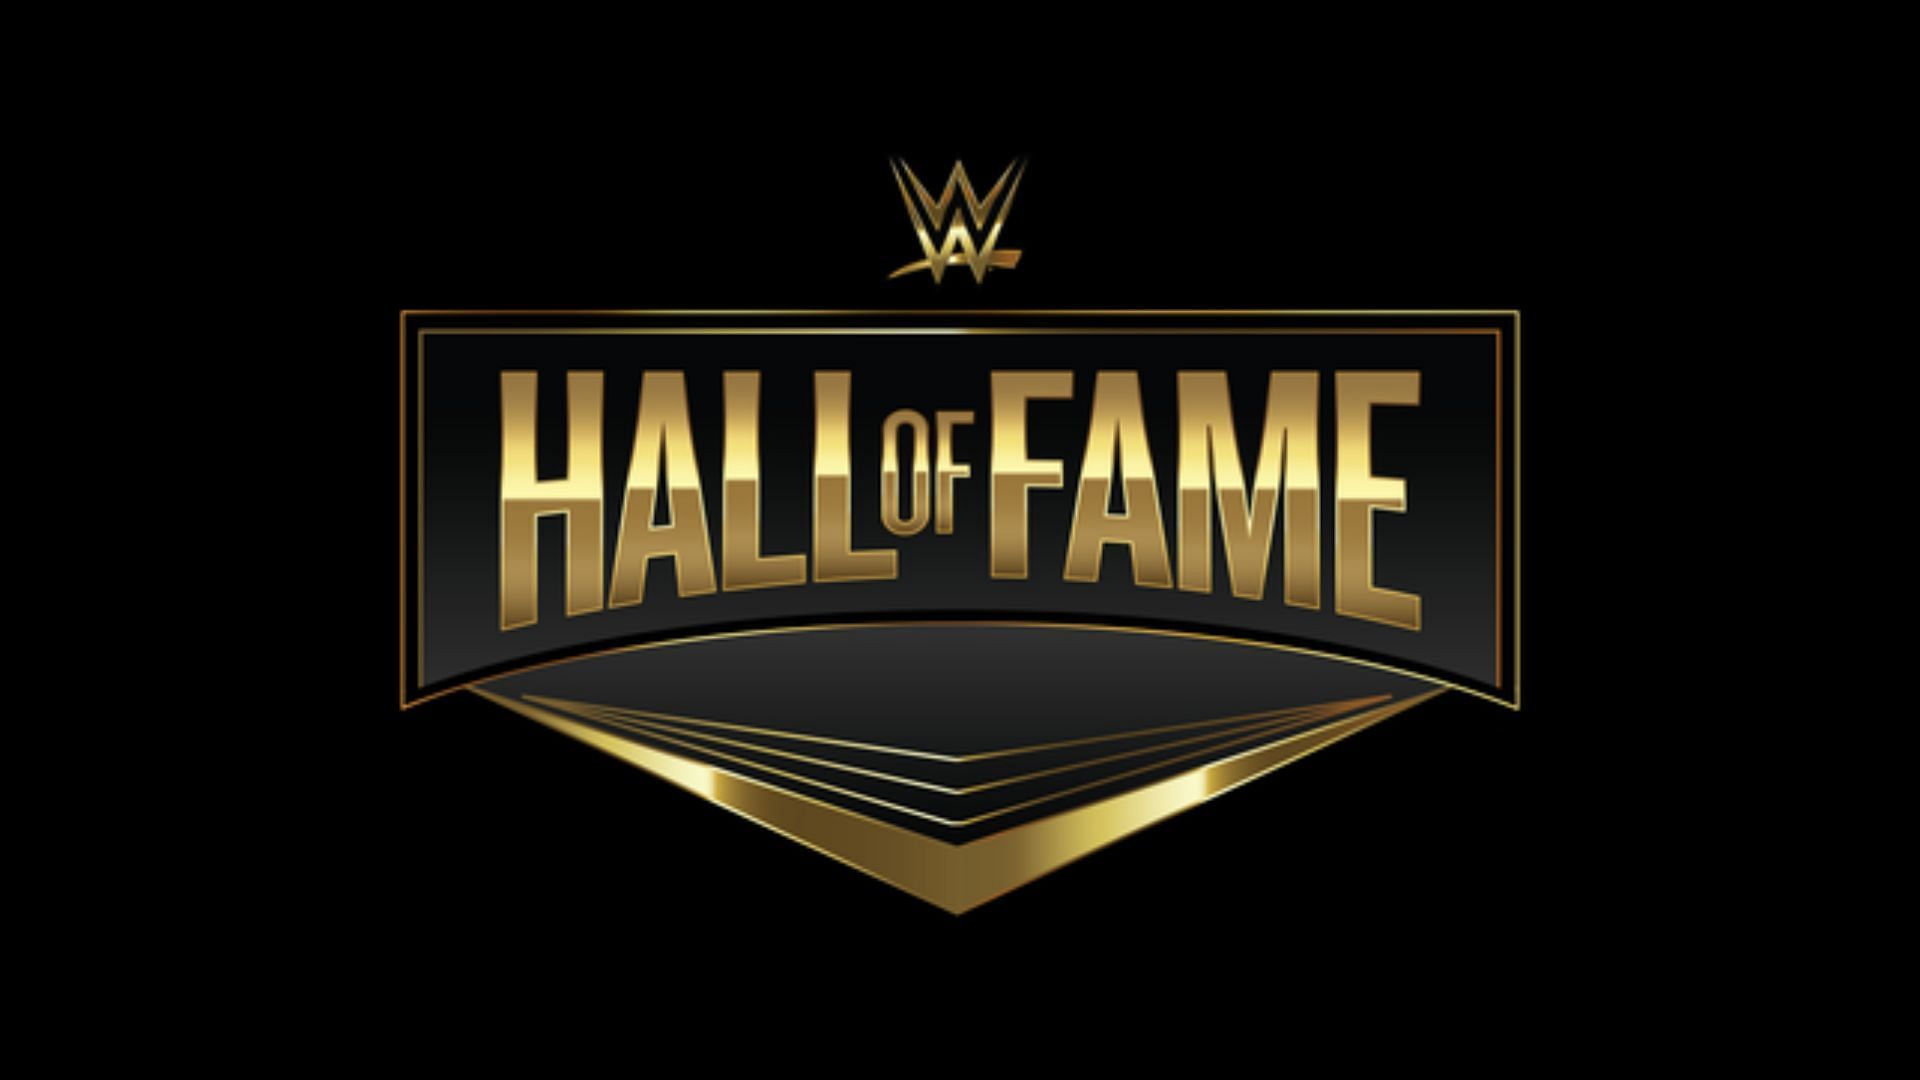 The WWE Hall of Fame occurs every year before WrestleMania